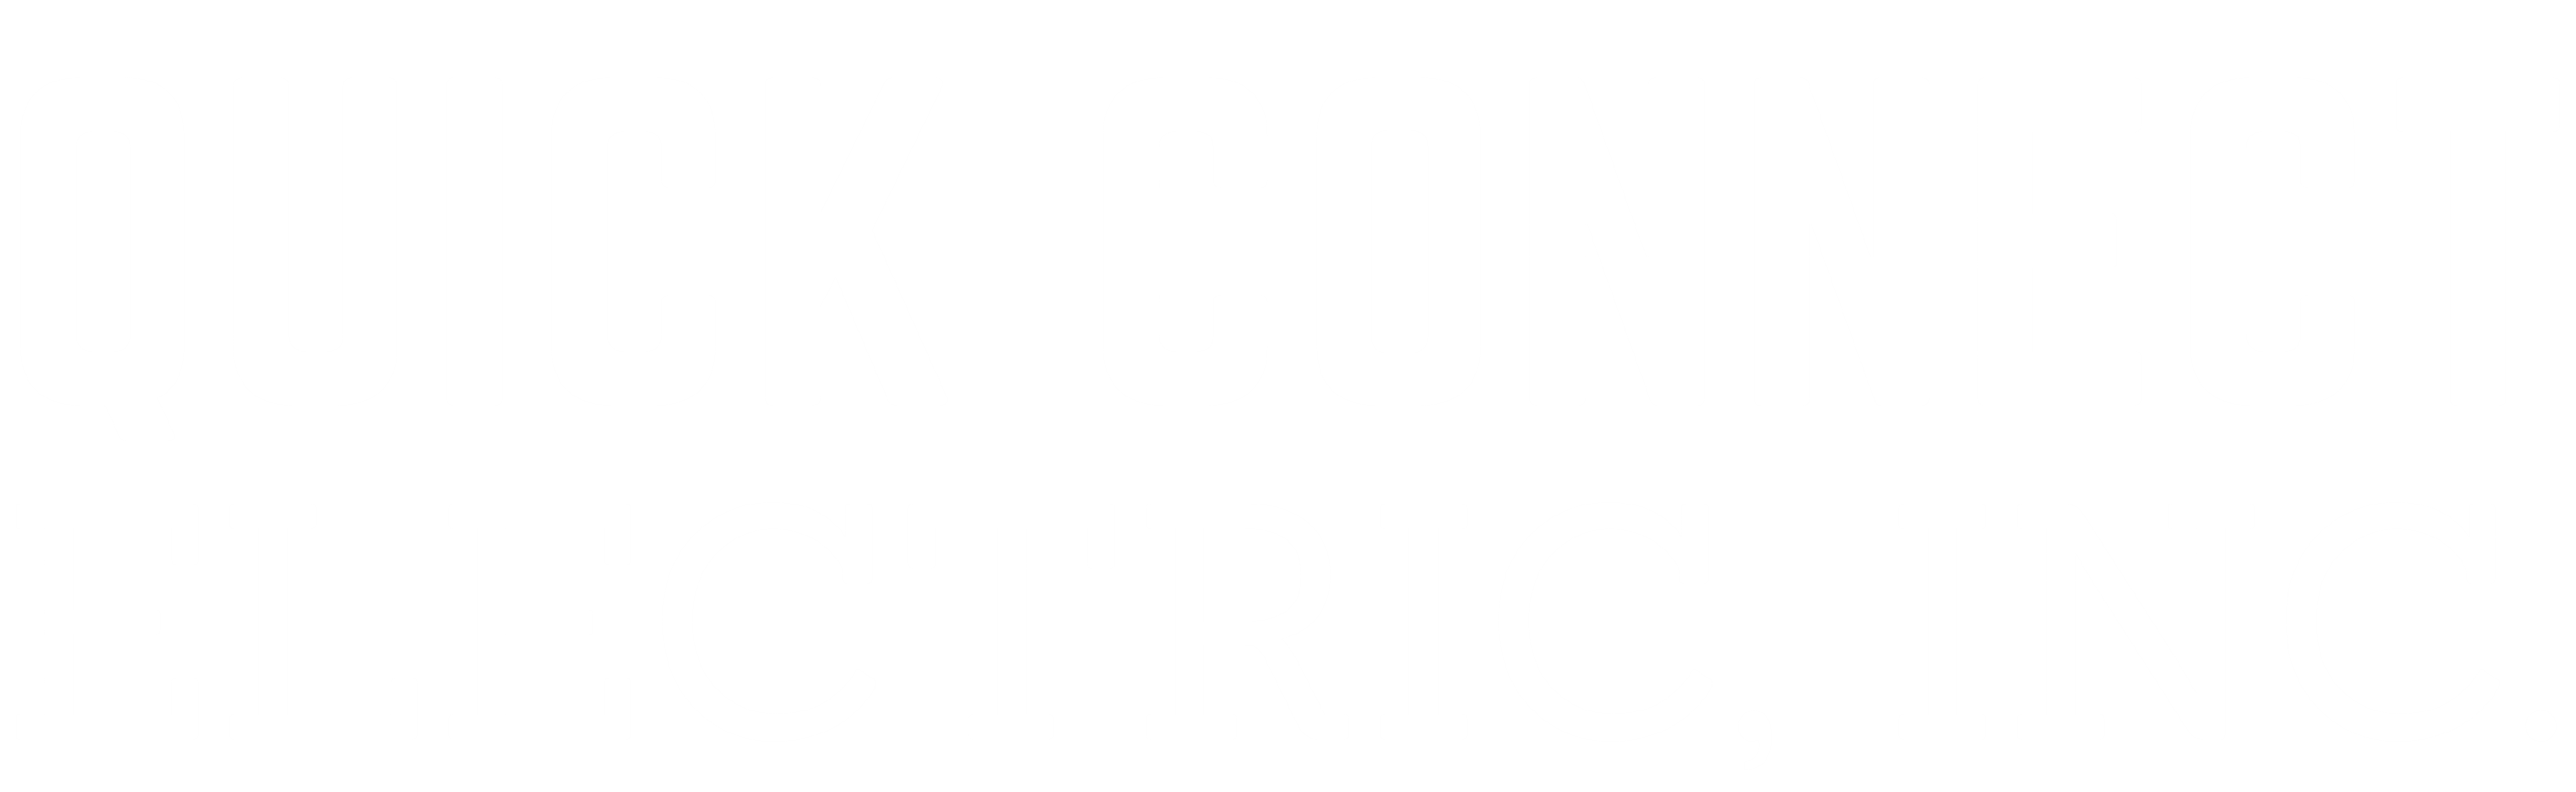 quick connect electric placeholder logo